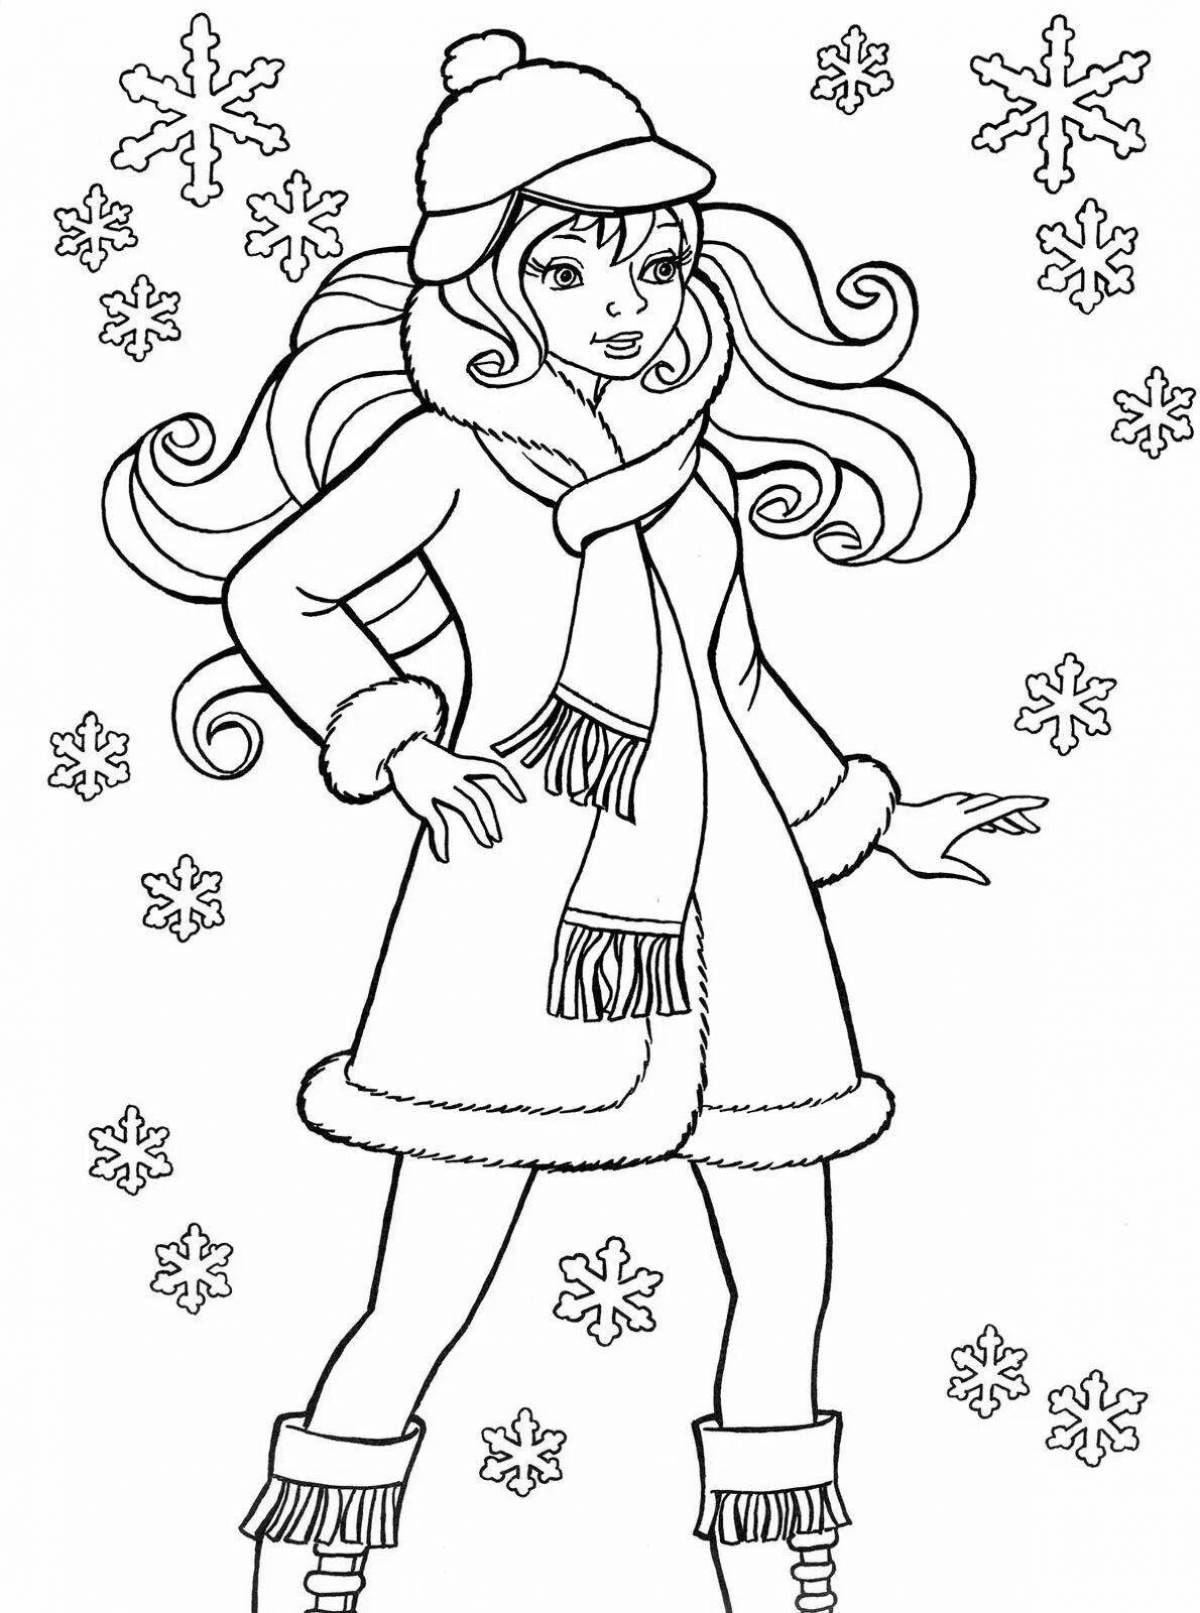 Colorful Christmas coloring book for girls